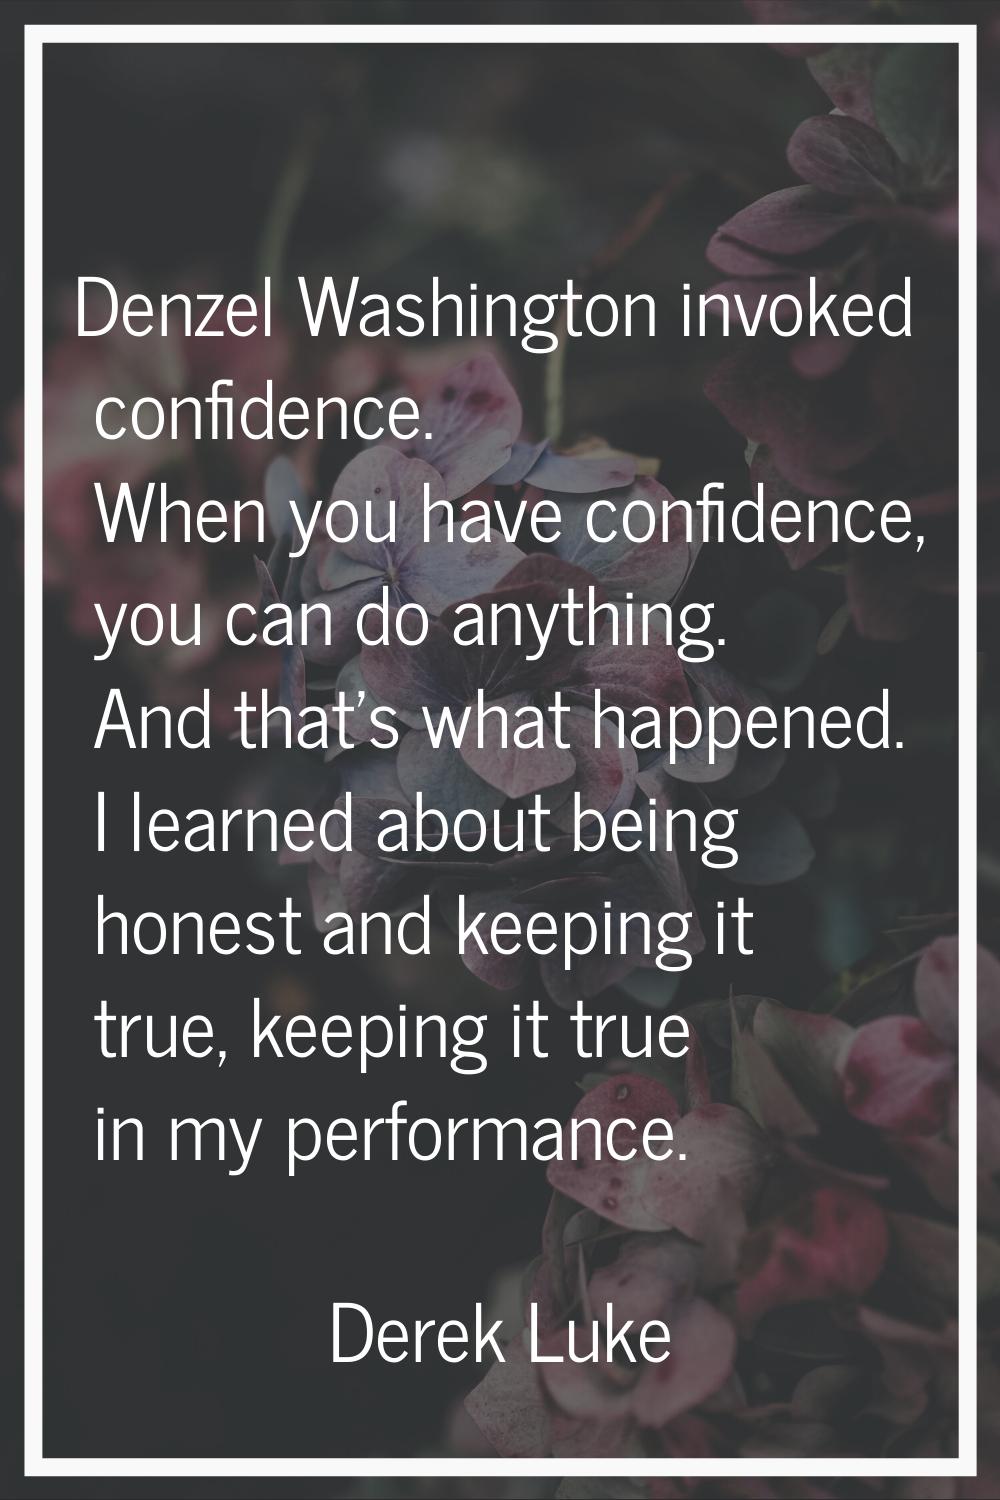 Denzel Washington invoked confidence. When you have confidence, you can do anything. And that's wha